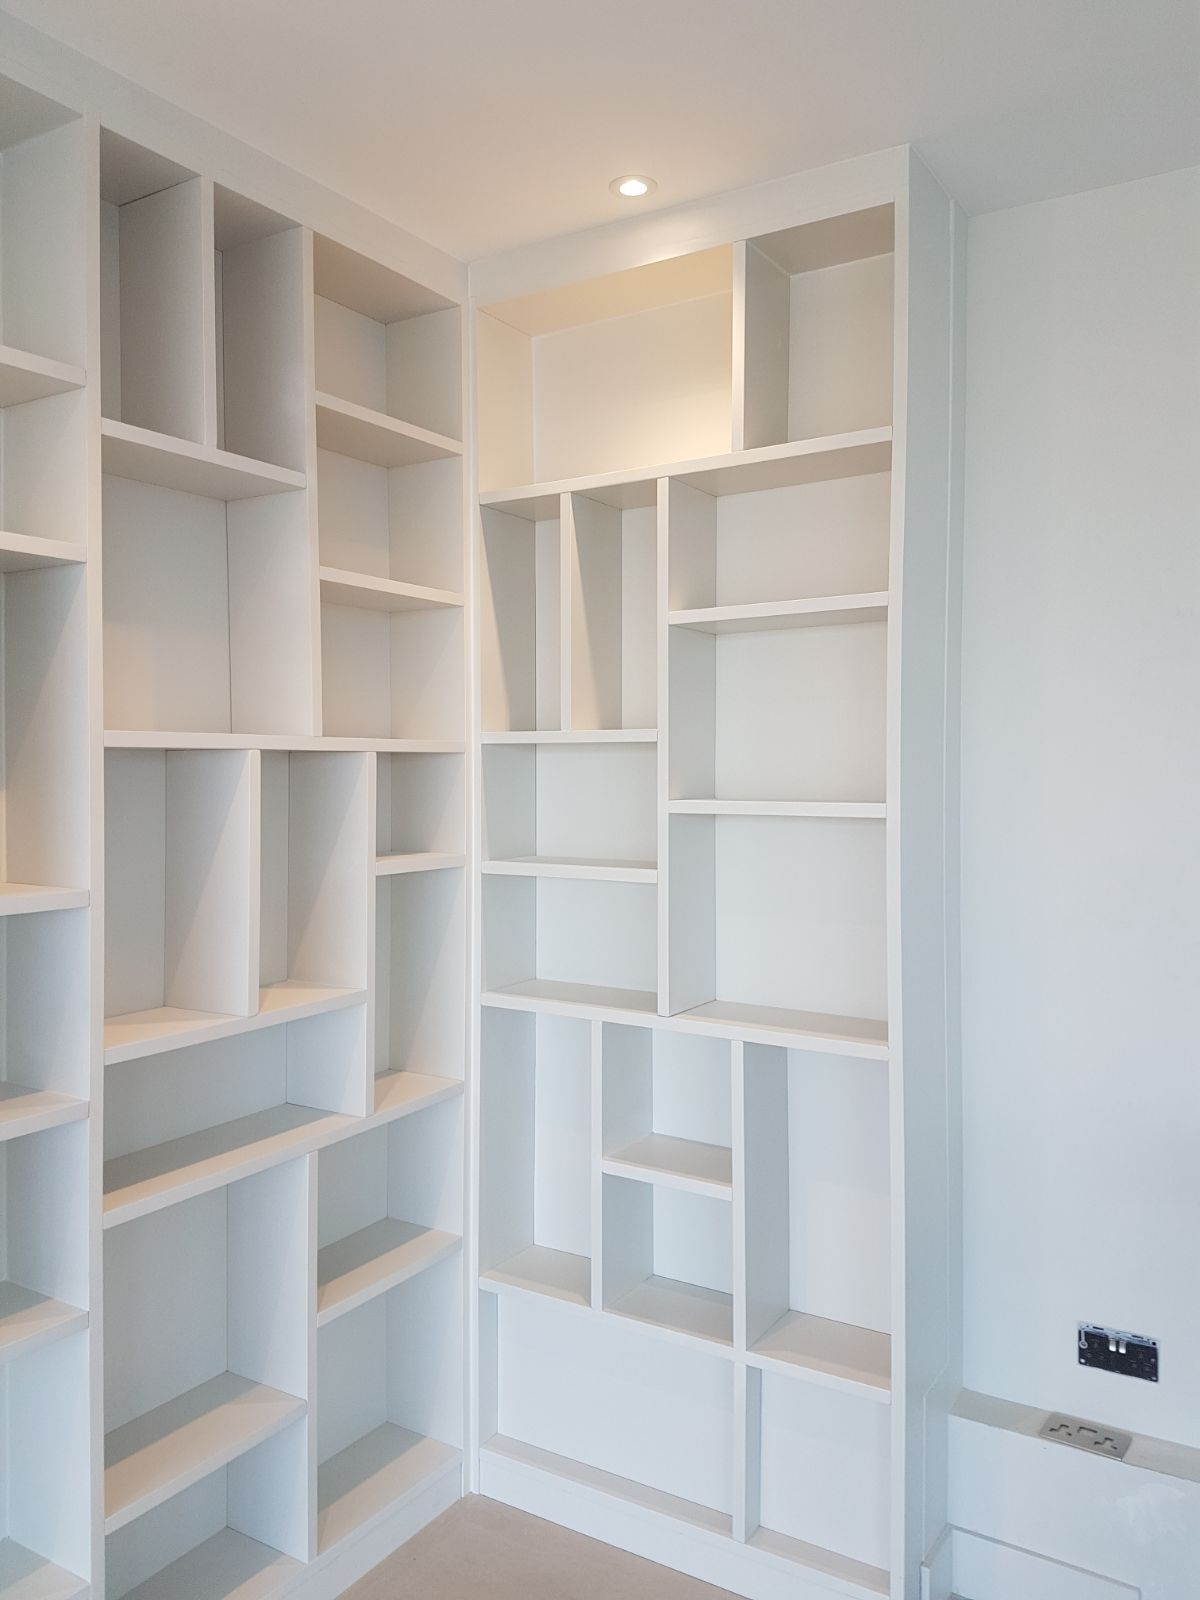 25mm Thick Chunky Shelving Unit Built In Furniture inside proportions 1200 X 1600